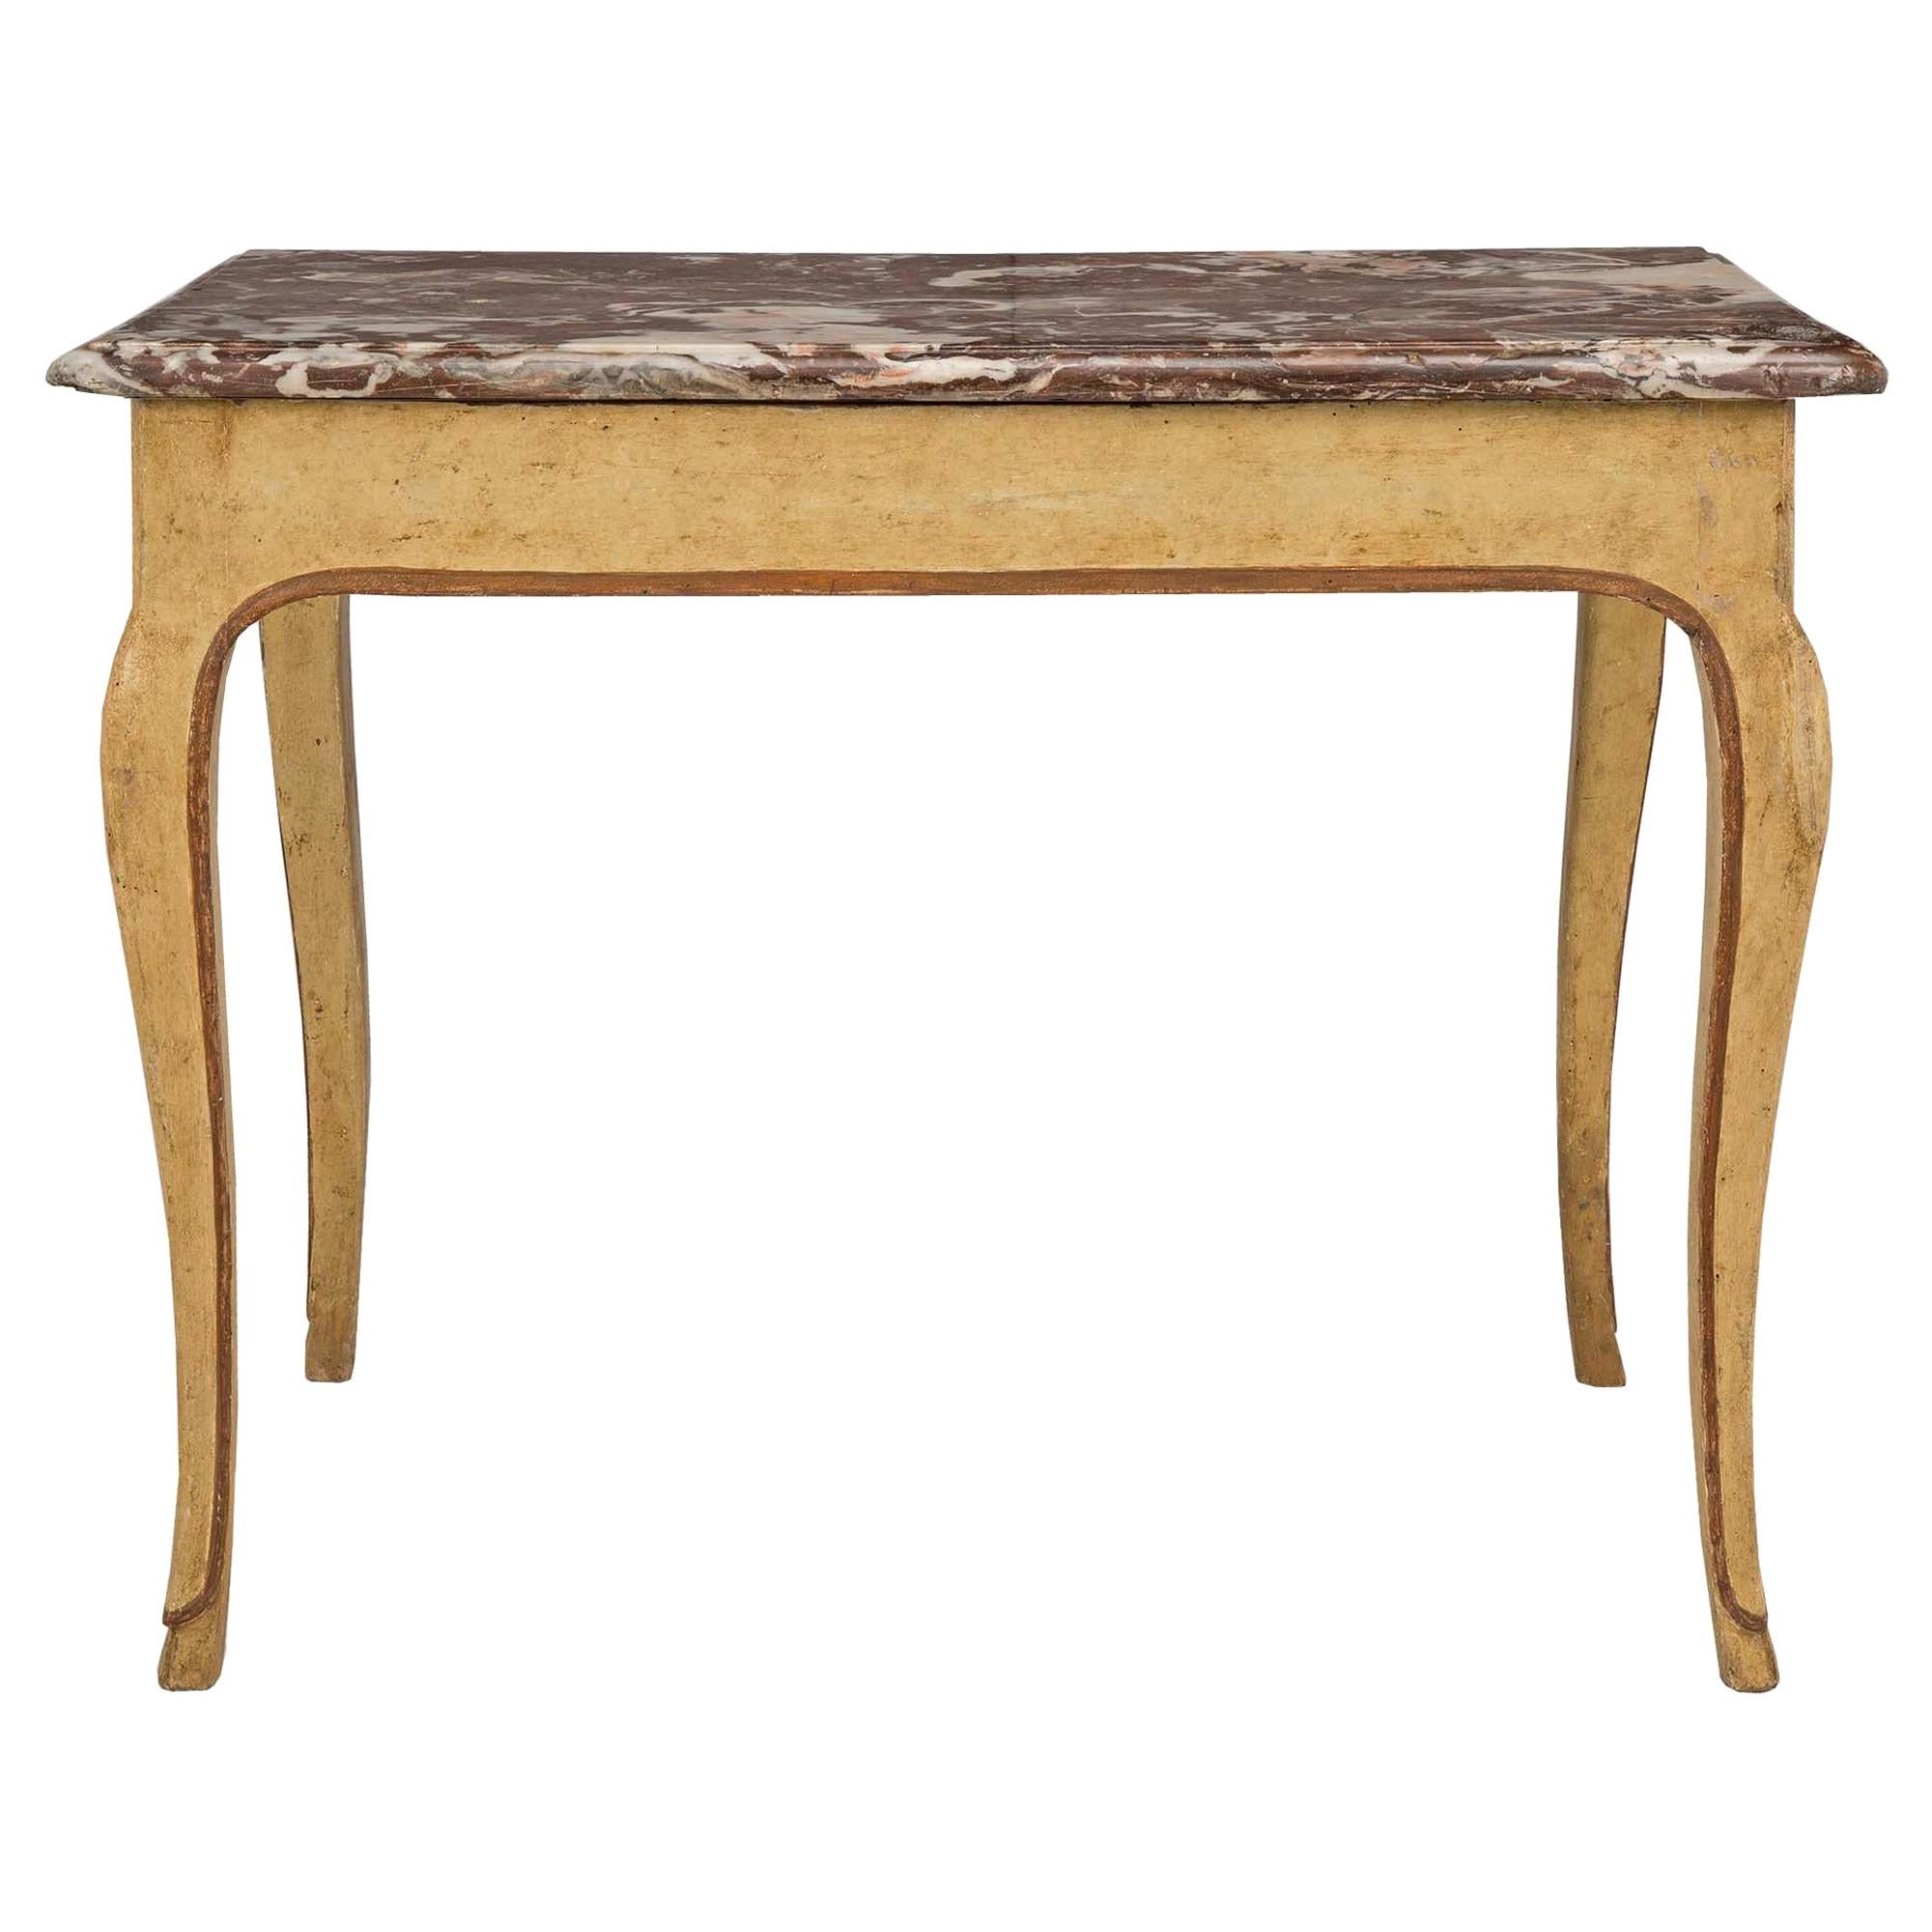 Italian 18th Century Louis XV Period Patinated Side Table For Sale